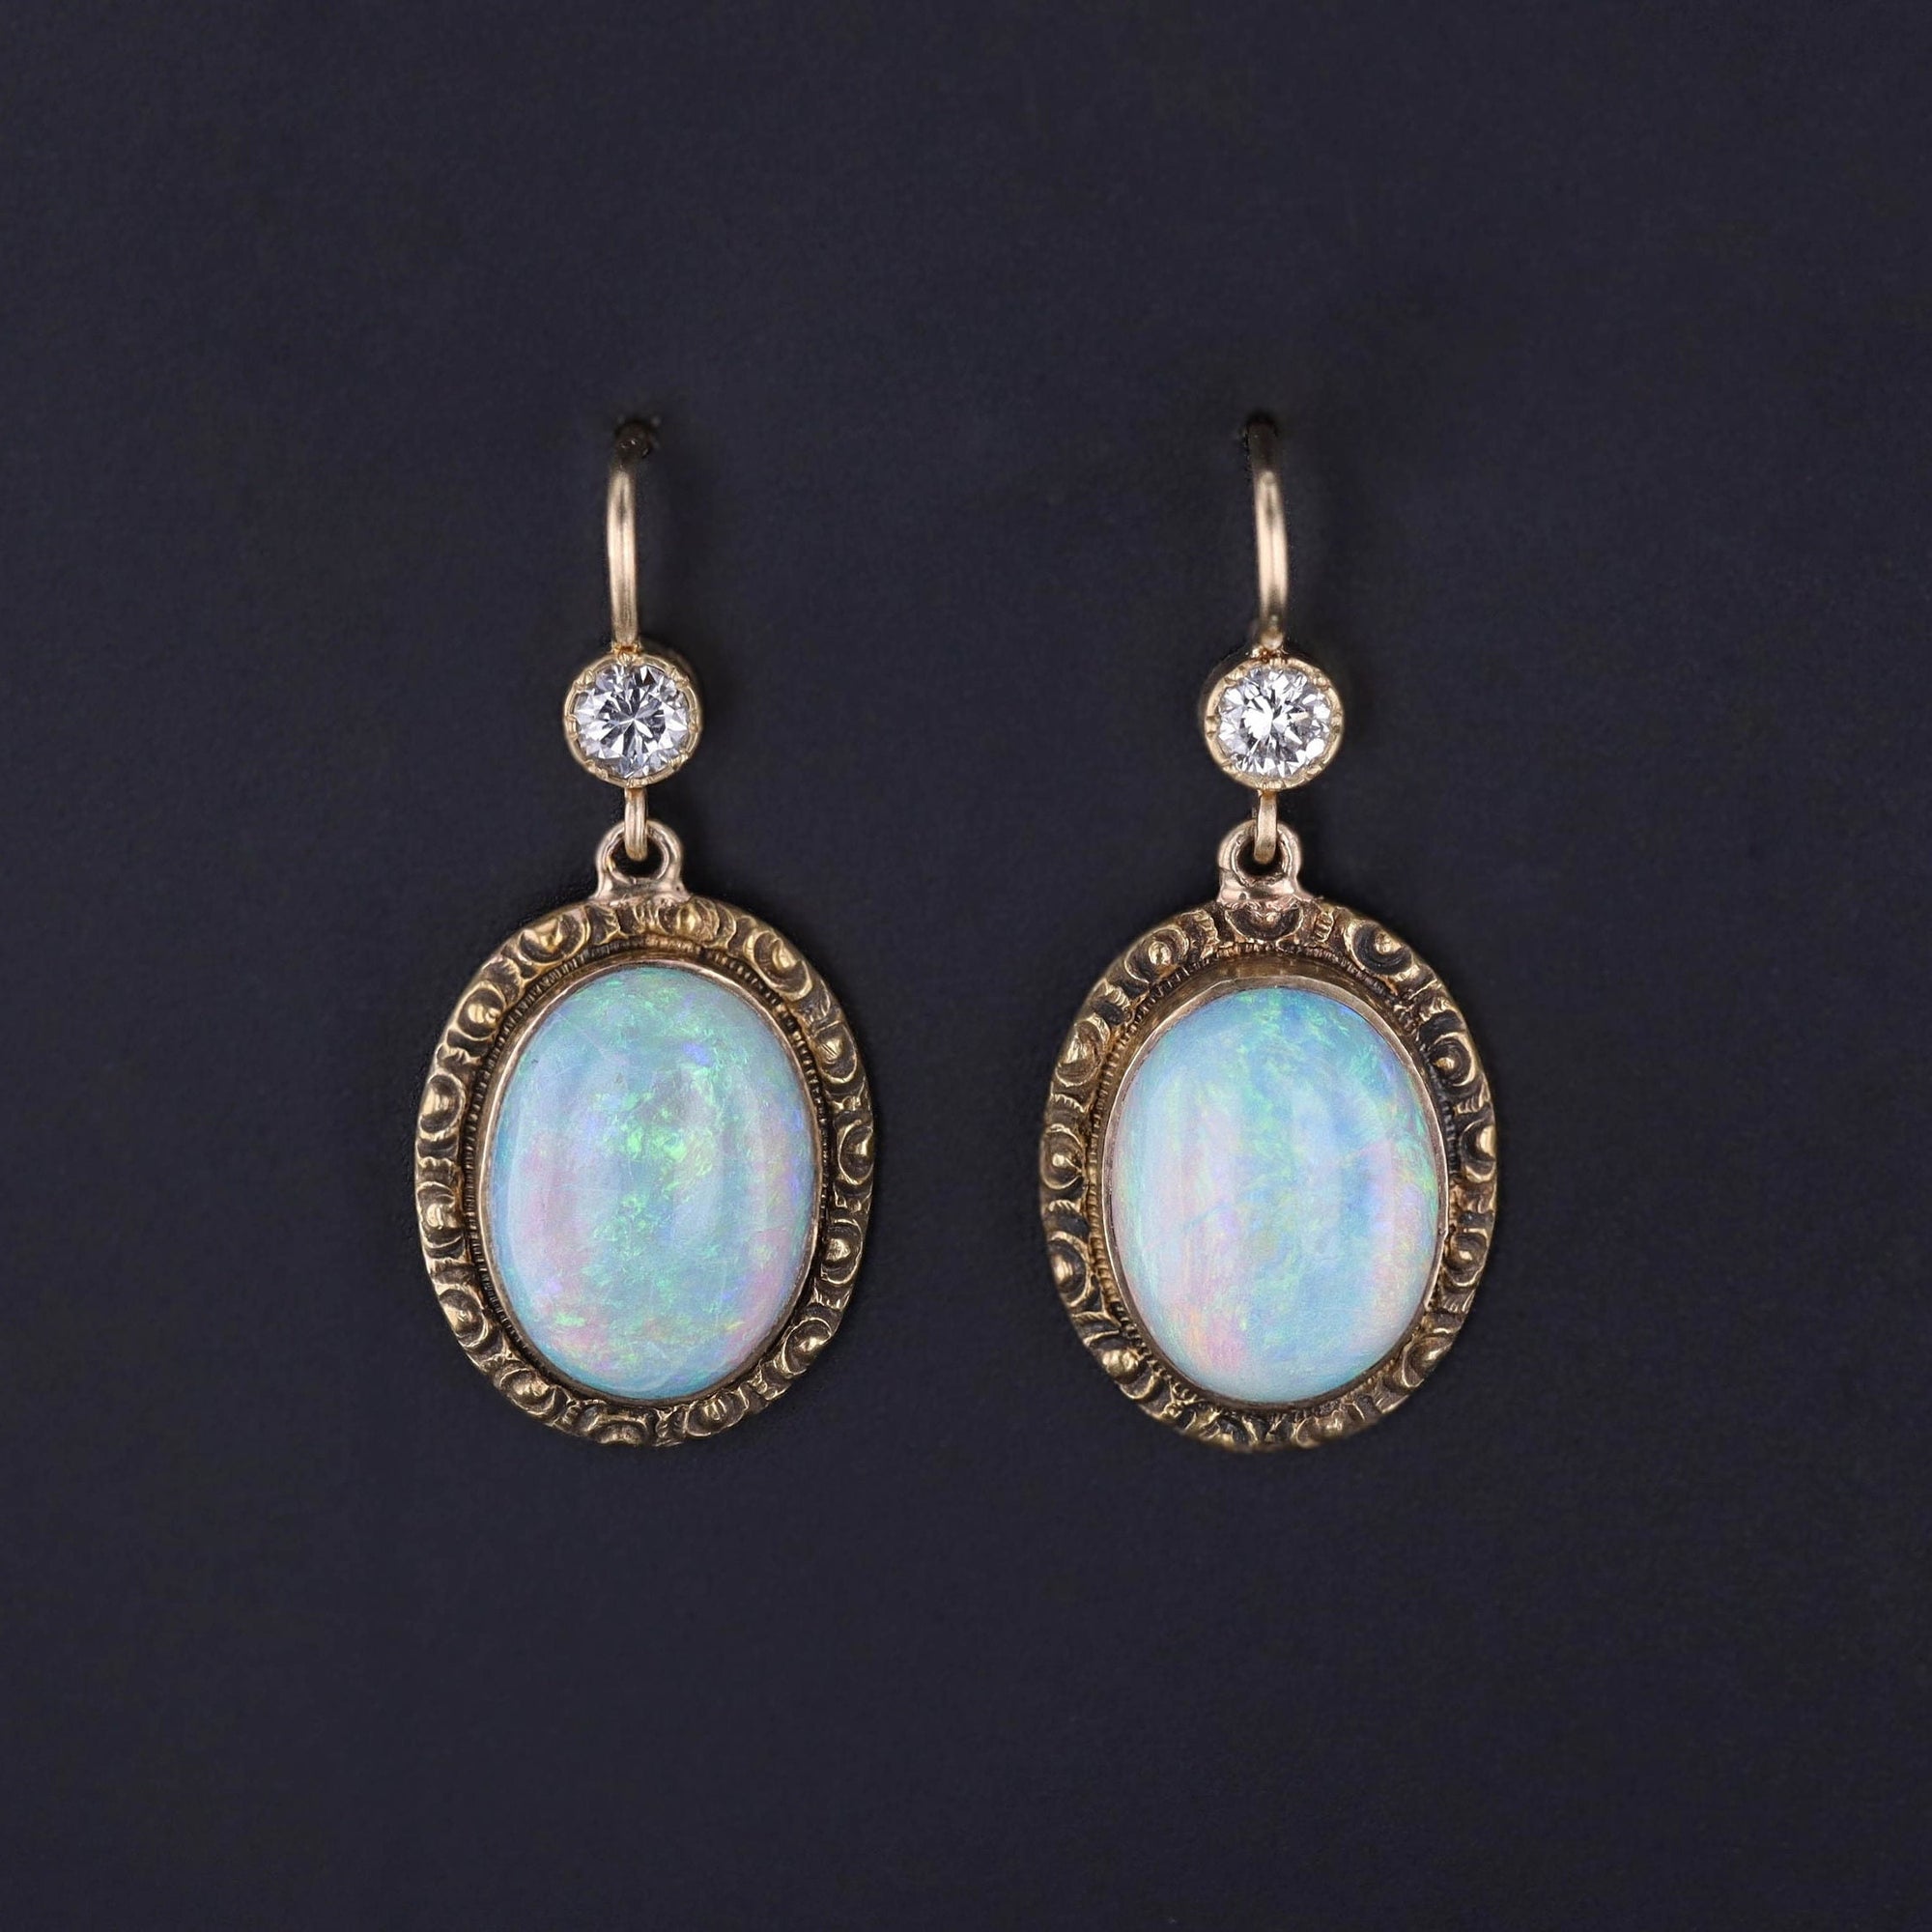 Antique Opal and Diamond Conversion Earrings of 14k Gold